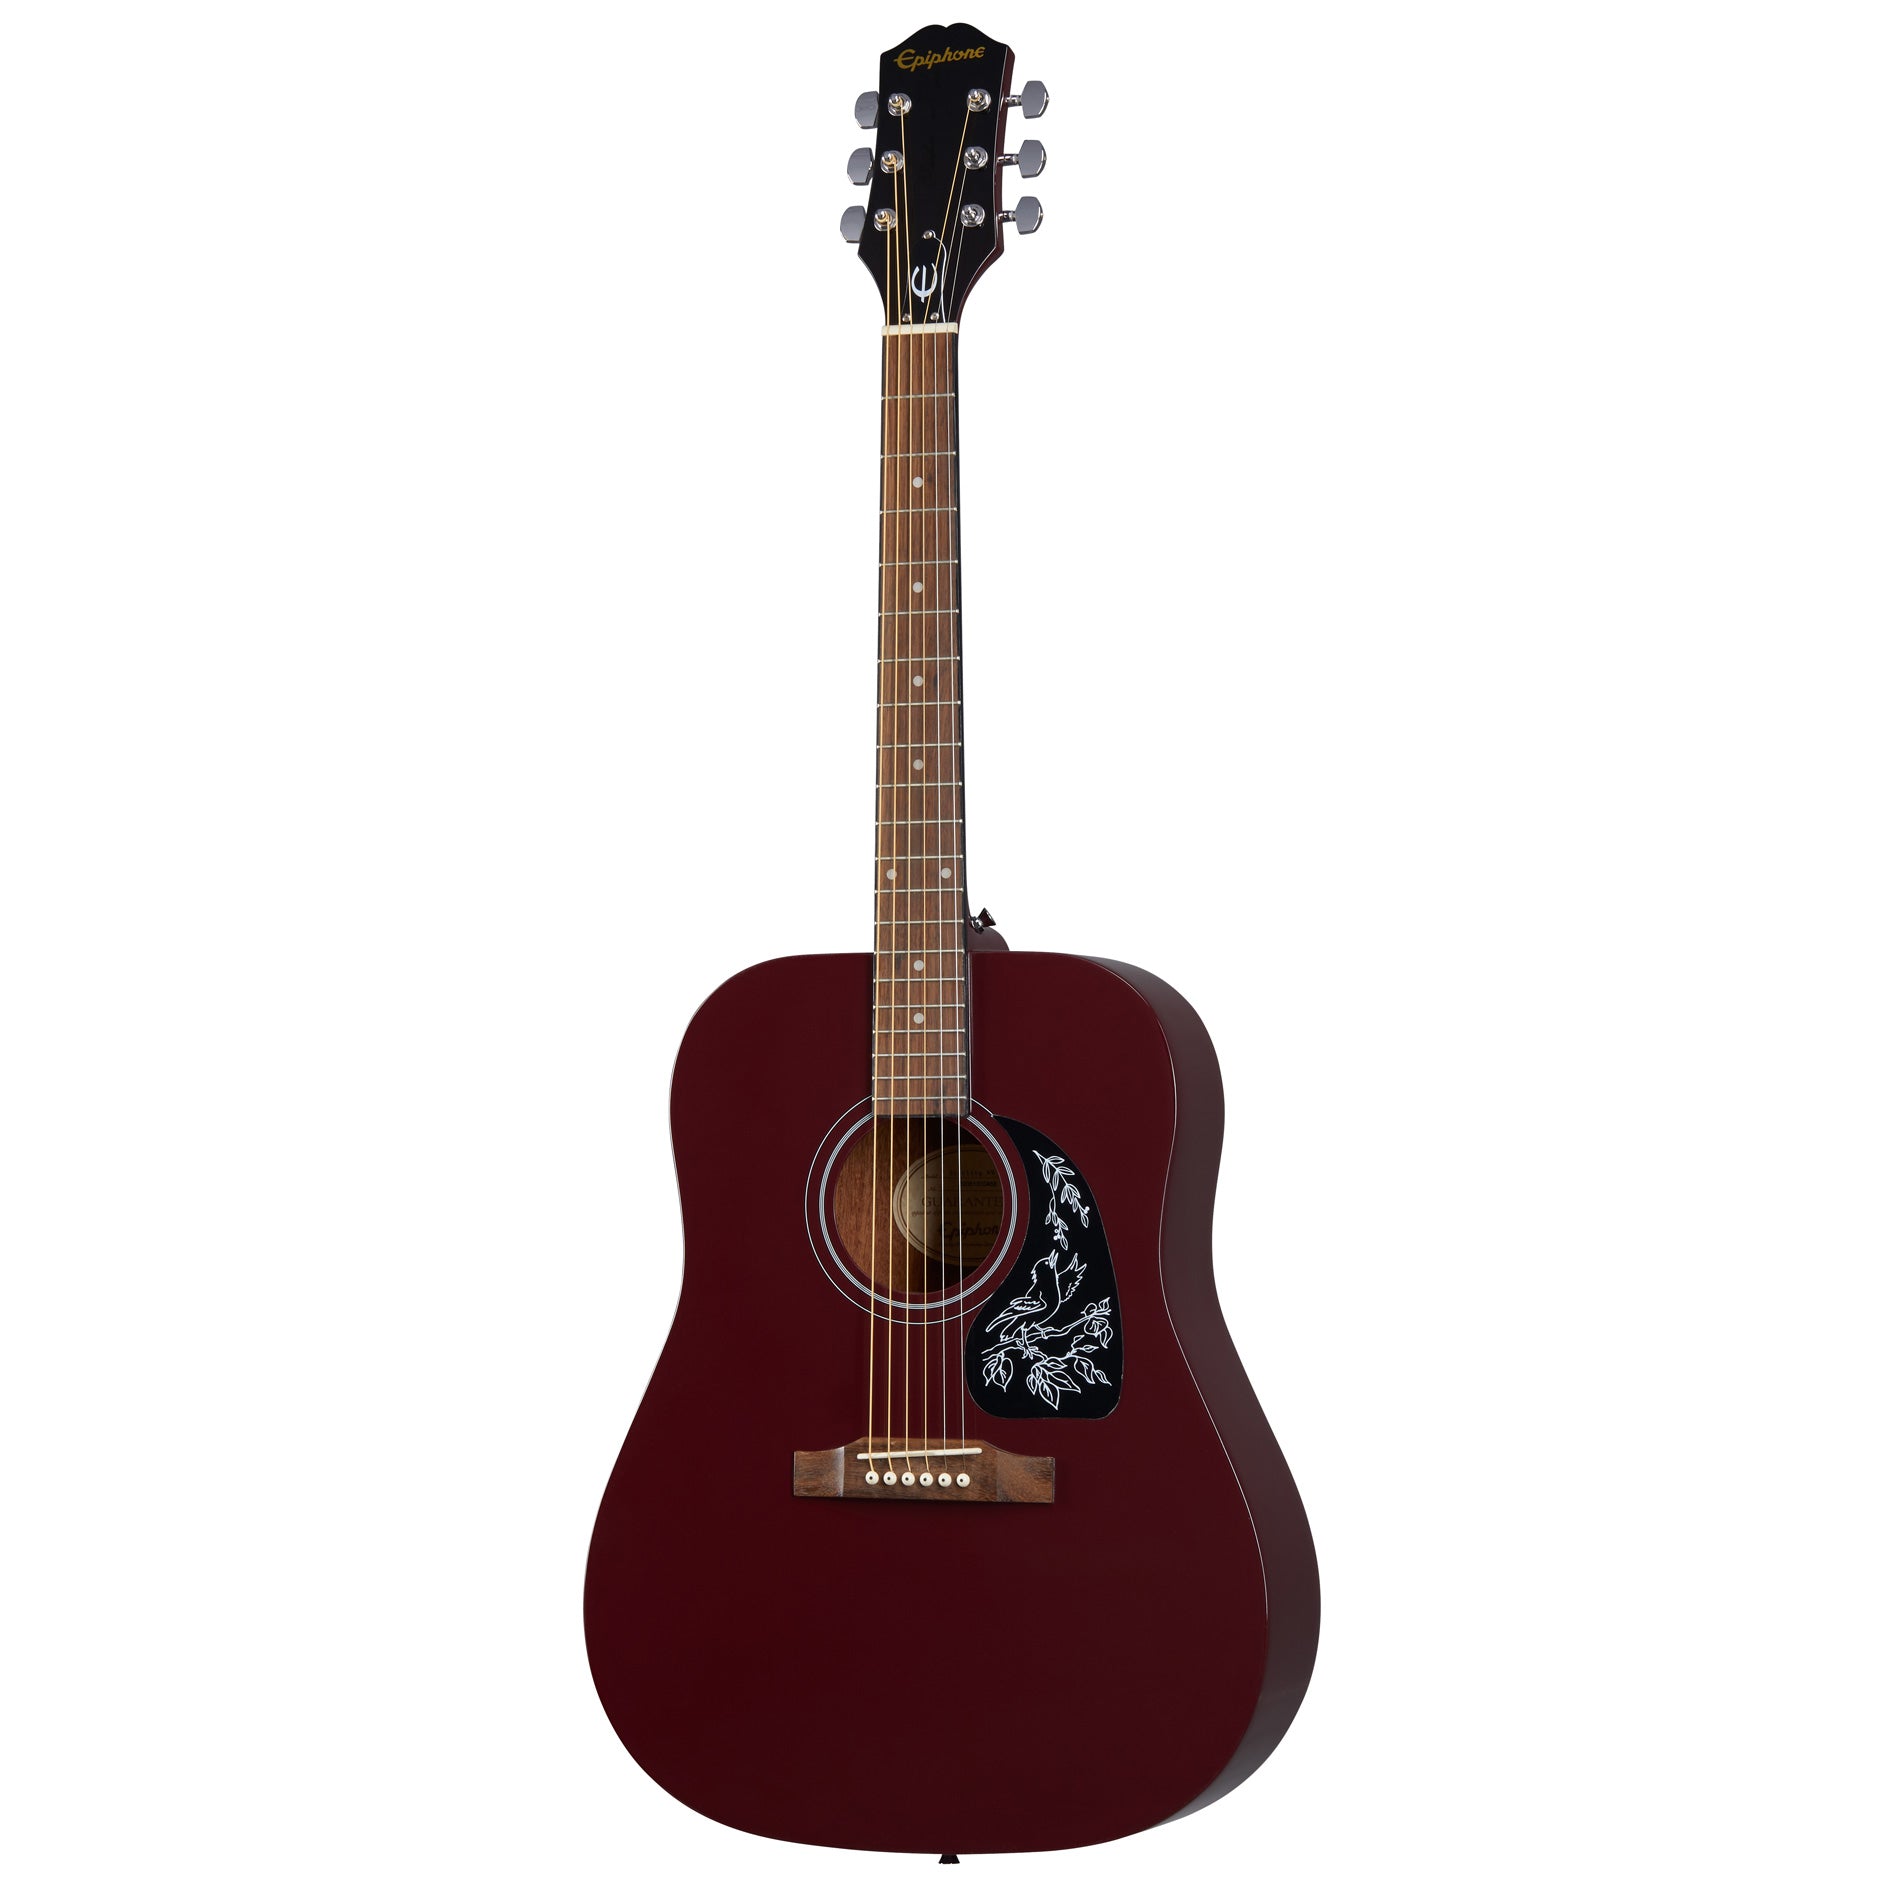 Epiphone Starling Acoustic Guitar Starter Pack - Wine Red